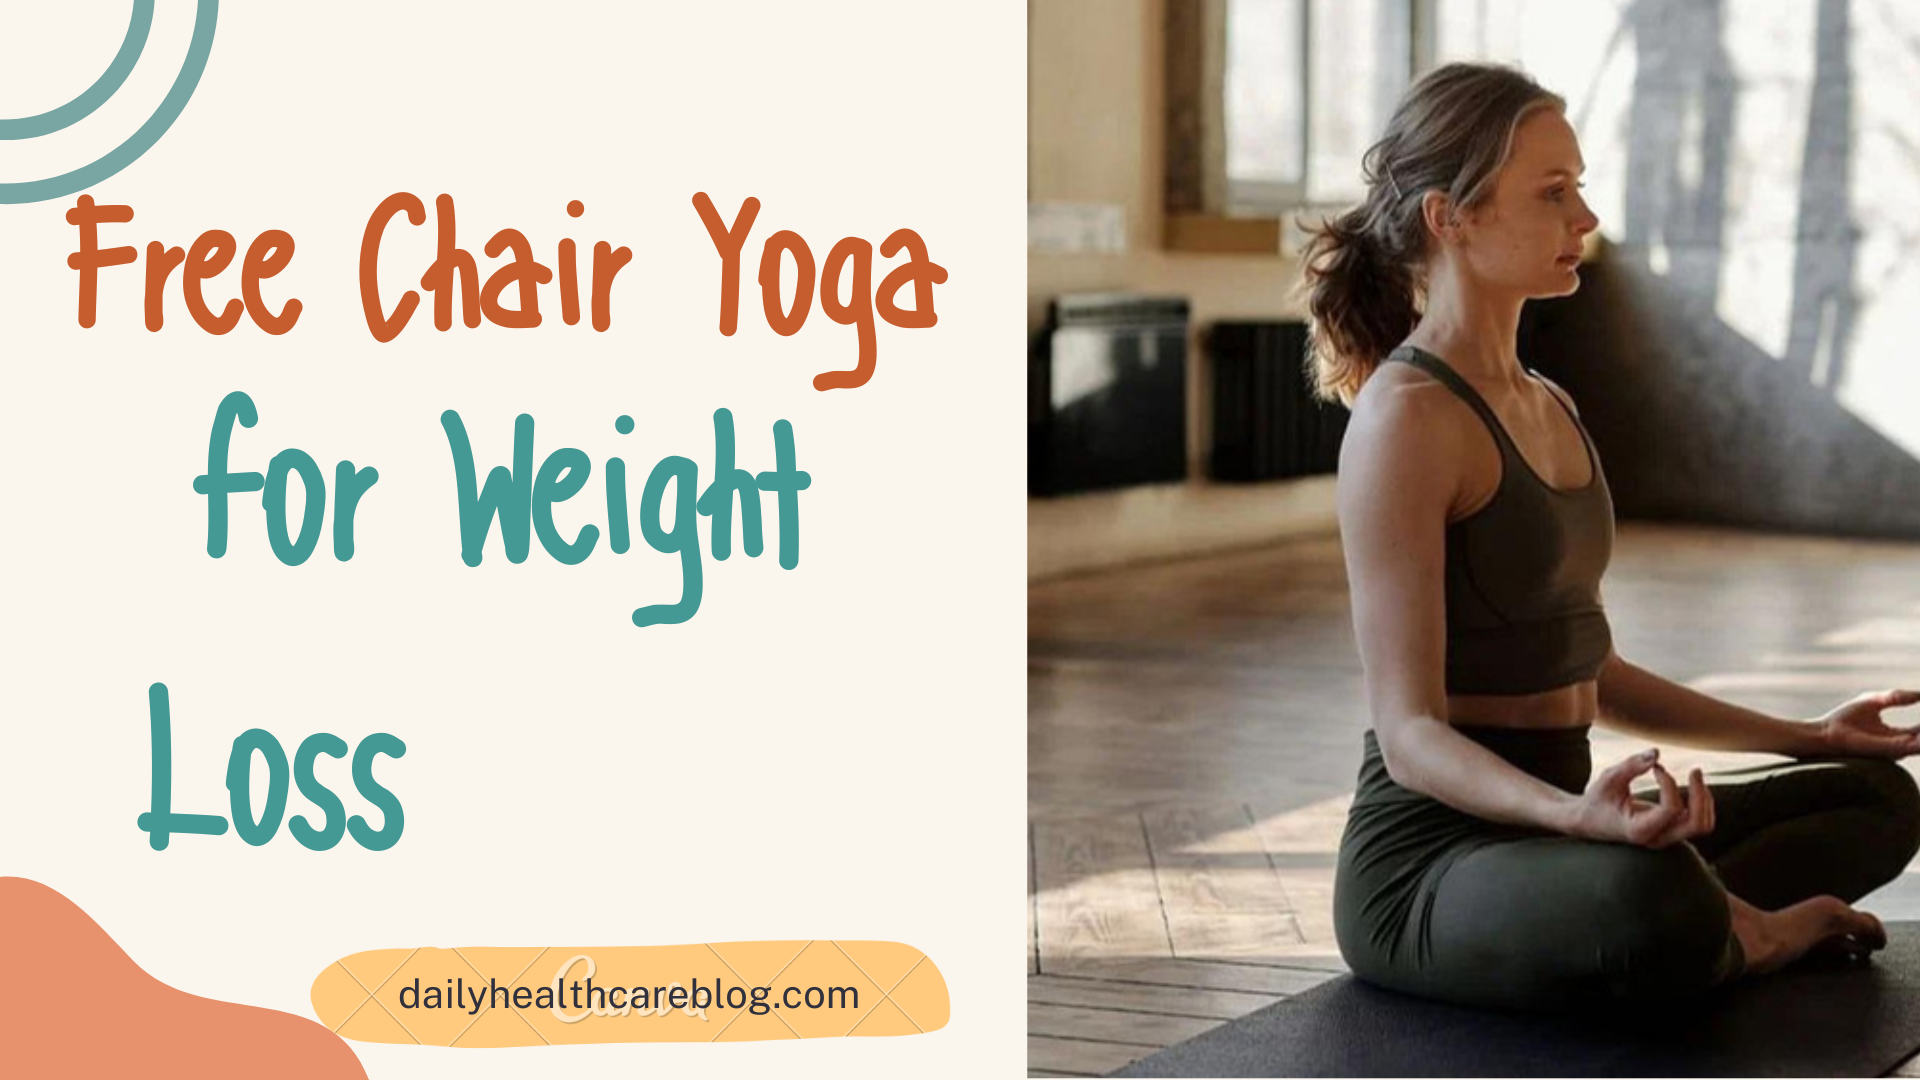 Free Chair Yoga for Weight Loss